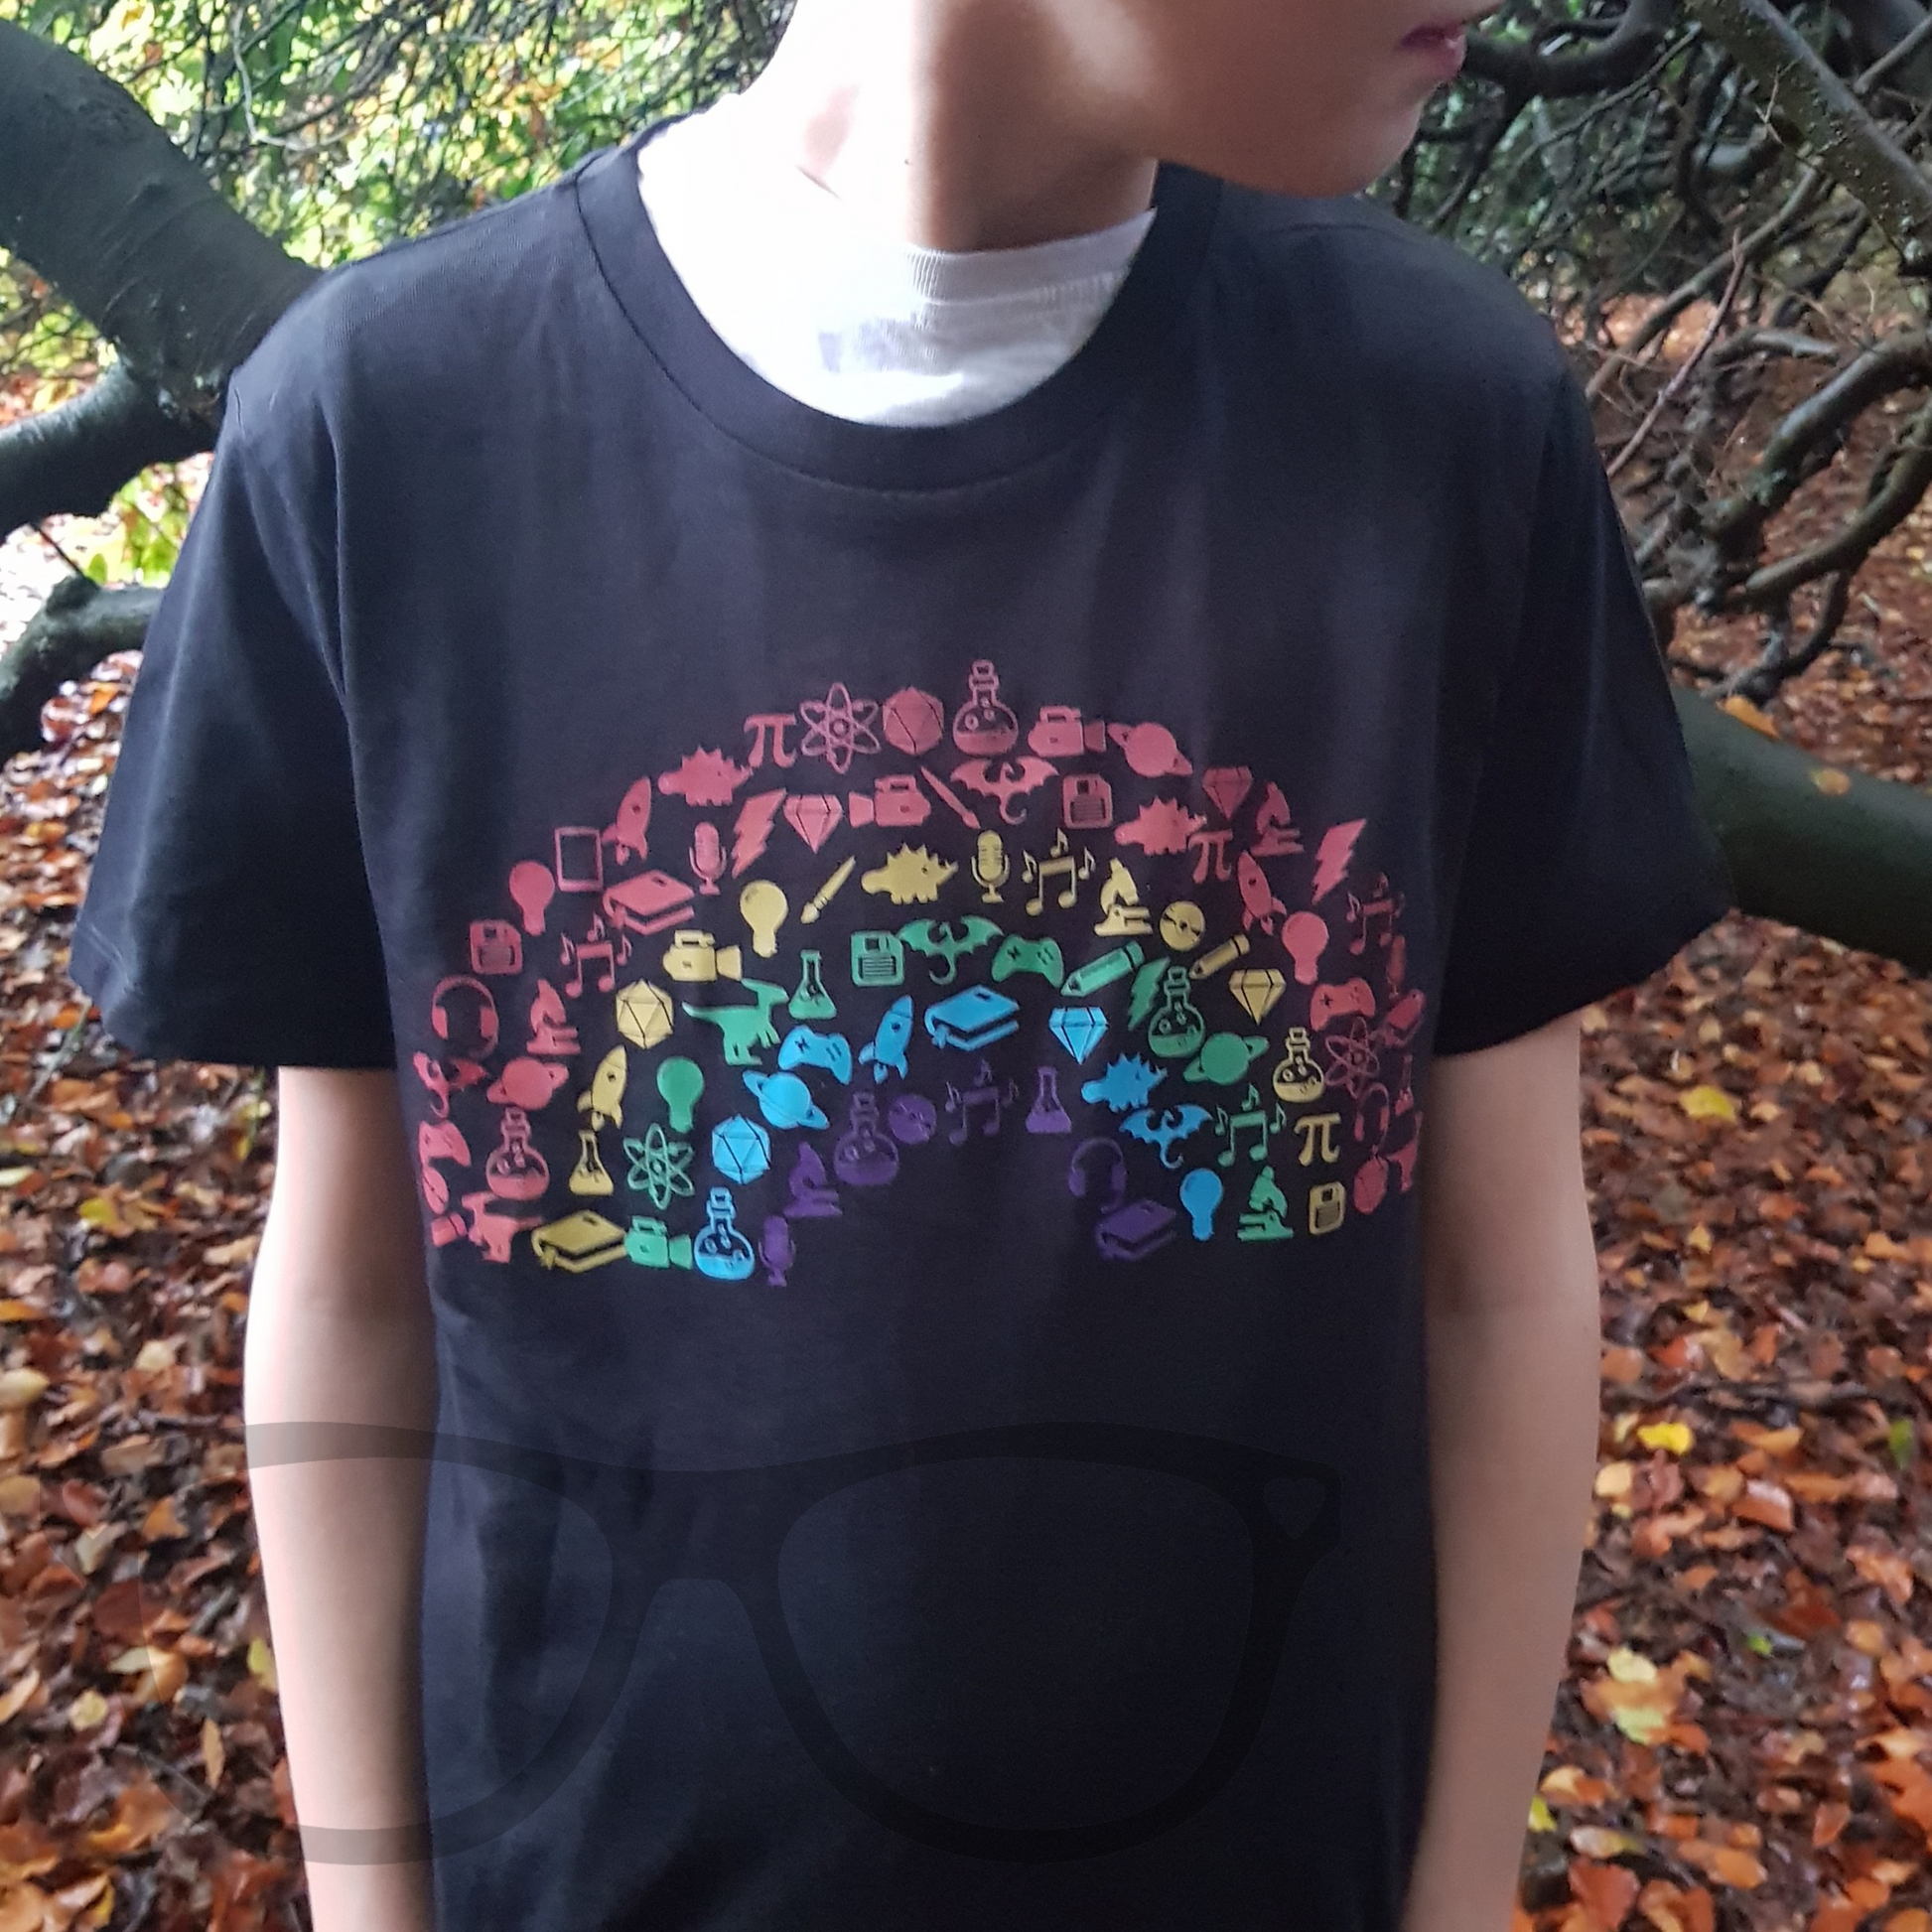 Geek and proud t-shirt. black t-shirt with a rainbow showing icons associated with being a geek. 